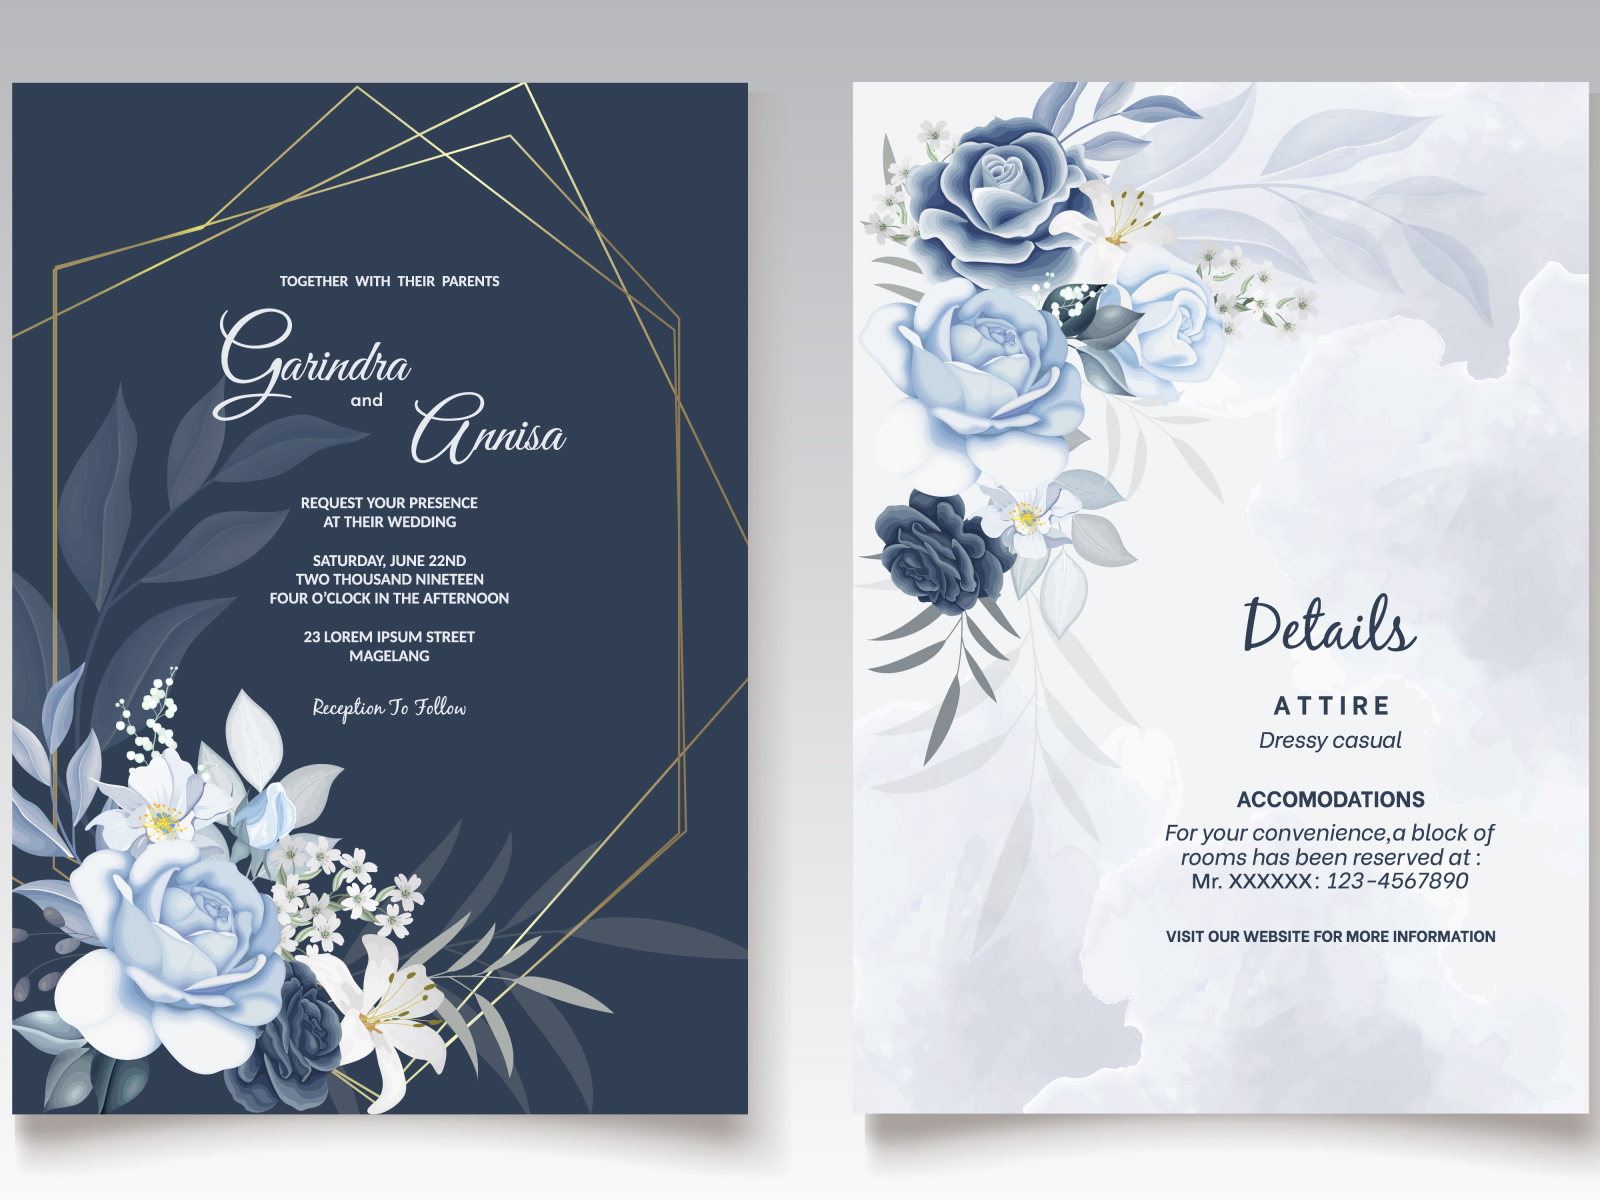 Elegant wedding invitation card with navy blue floral and leave by MARIA  NURINCE DOMINGGAS on Dribbble